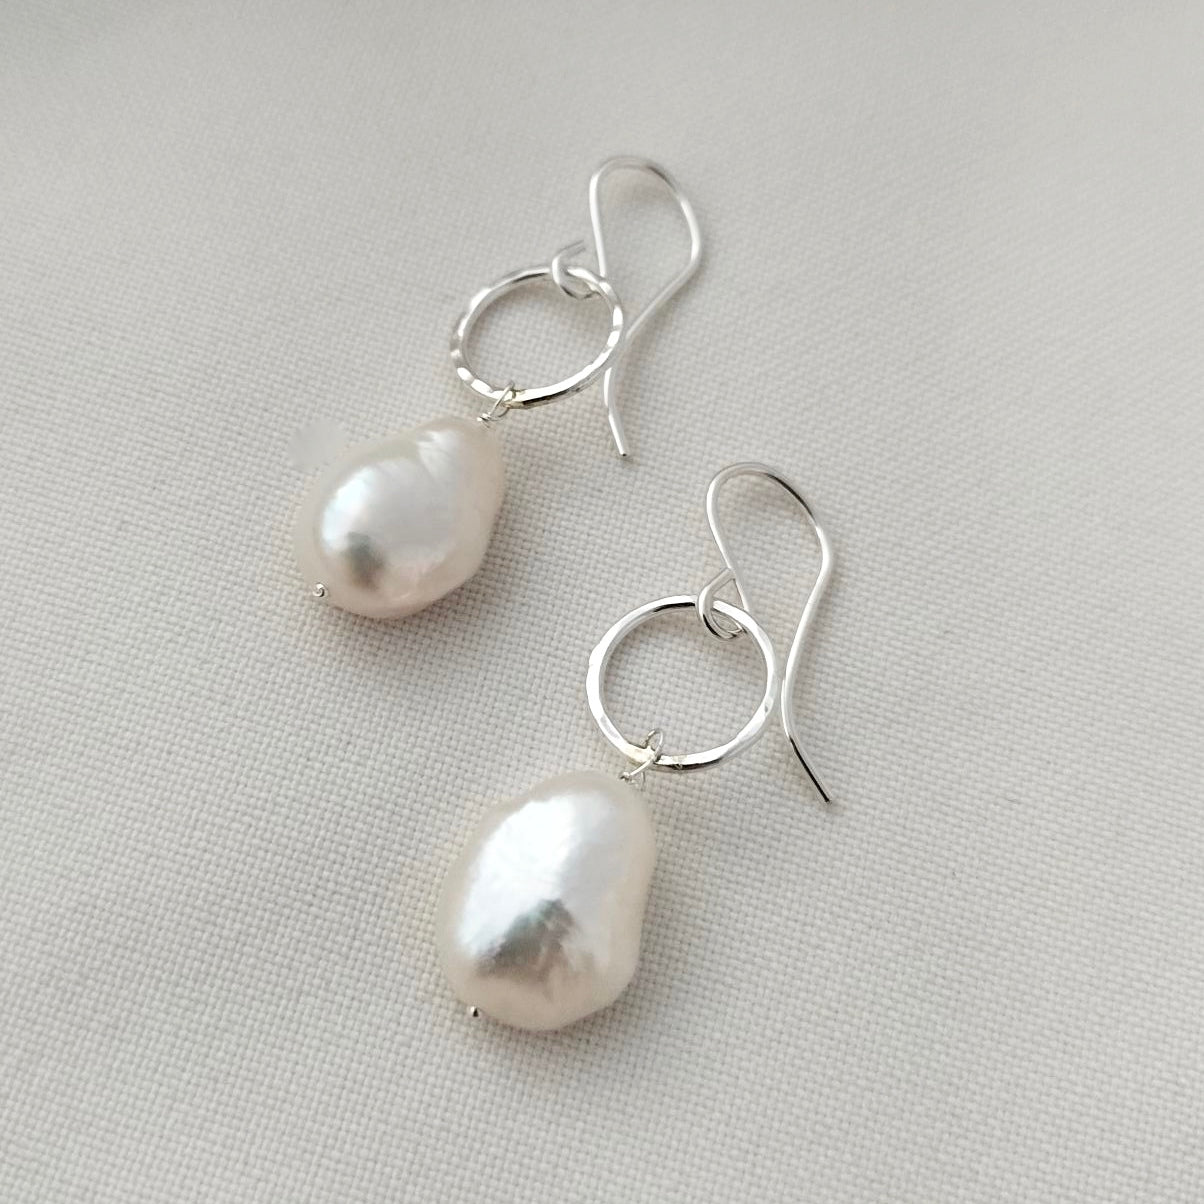 Silver circle and pearl earrings